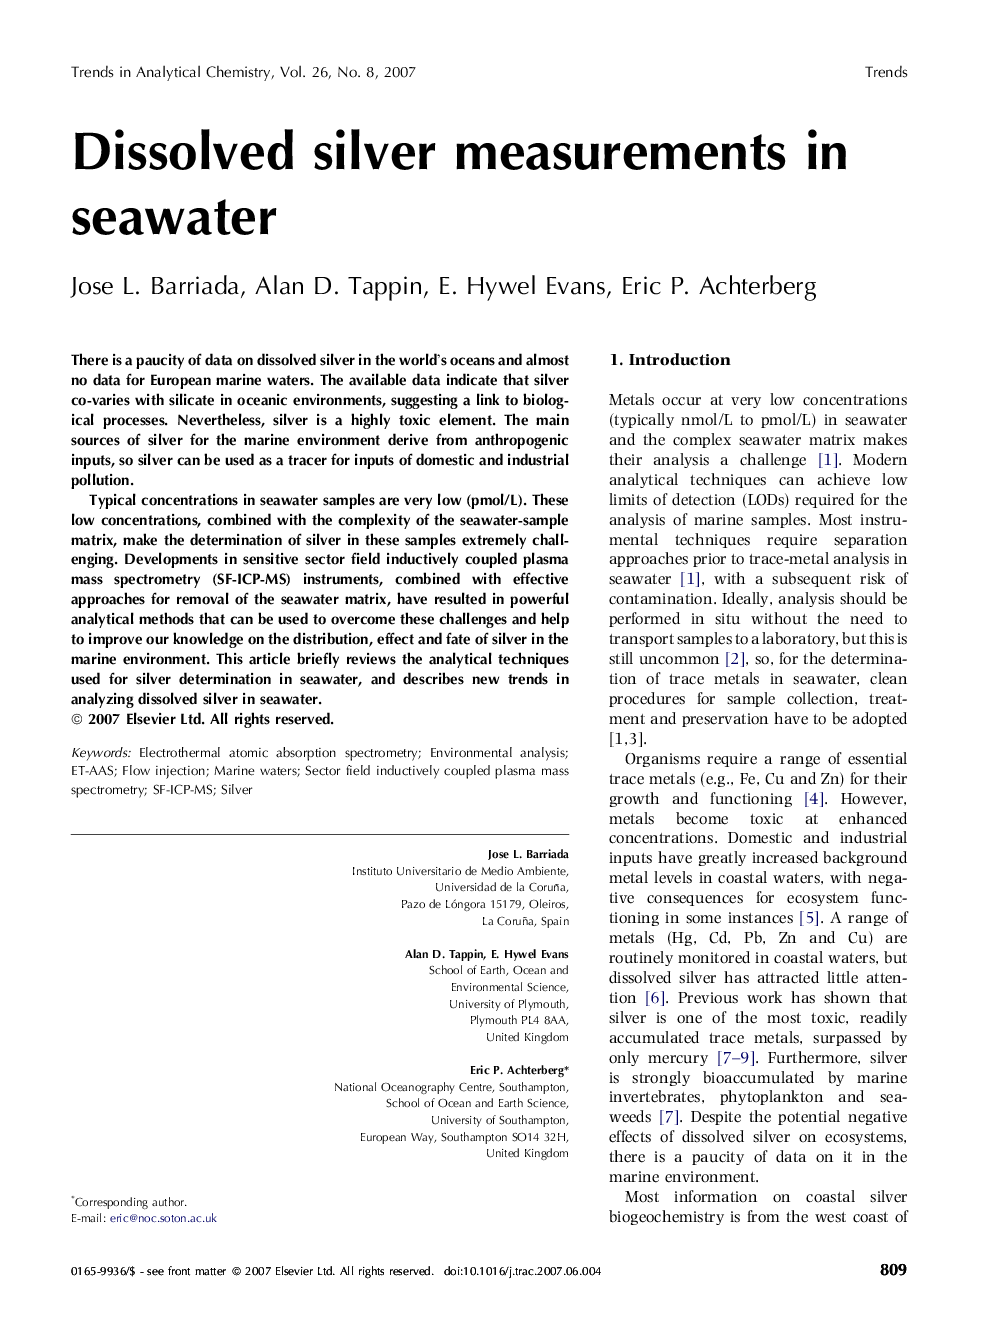 Dissolved silver measurements in seawater